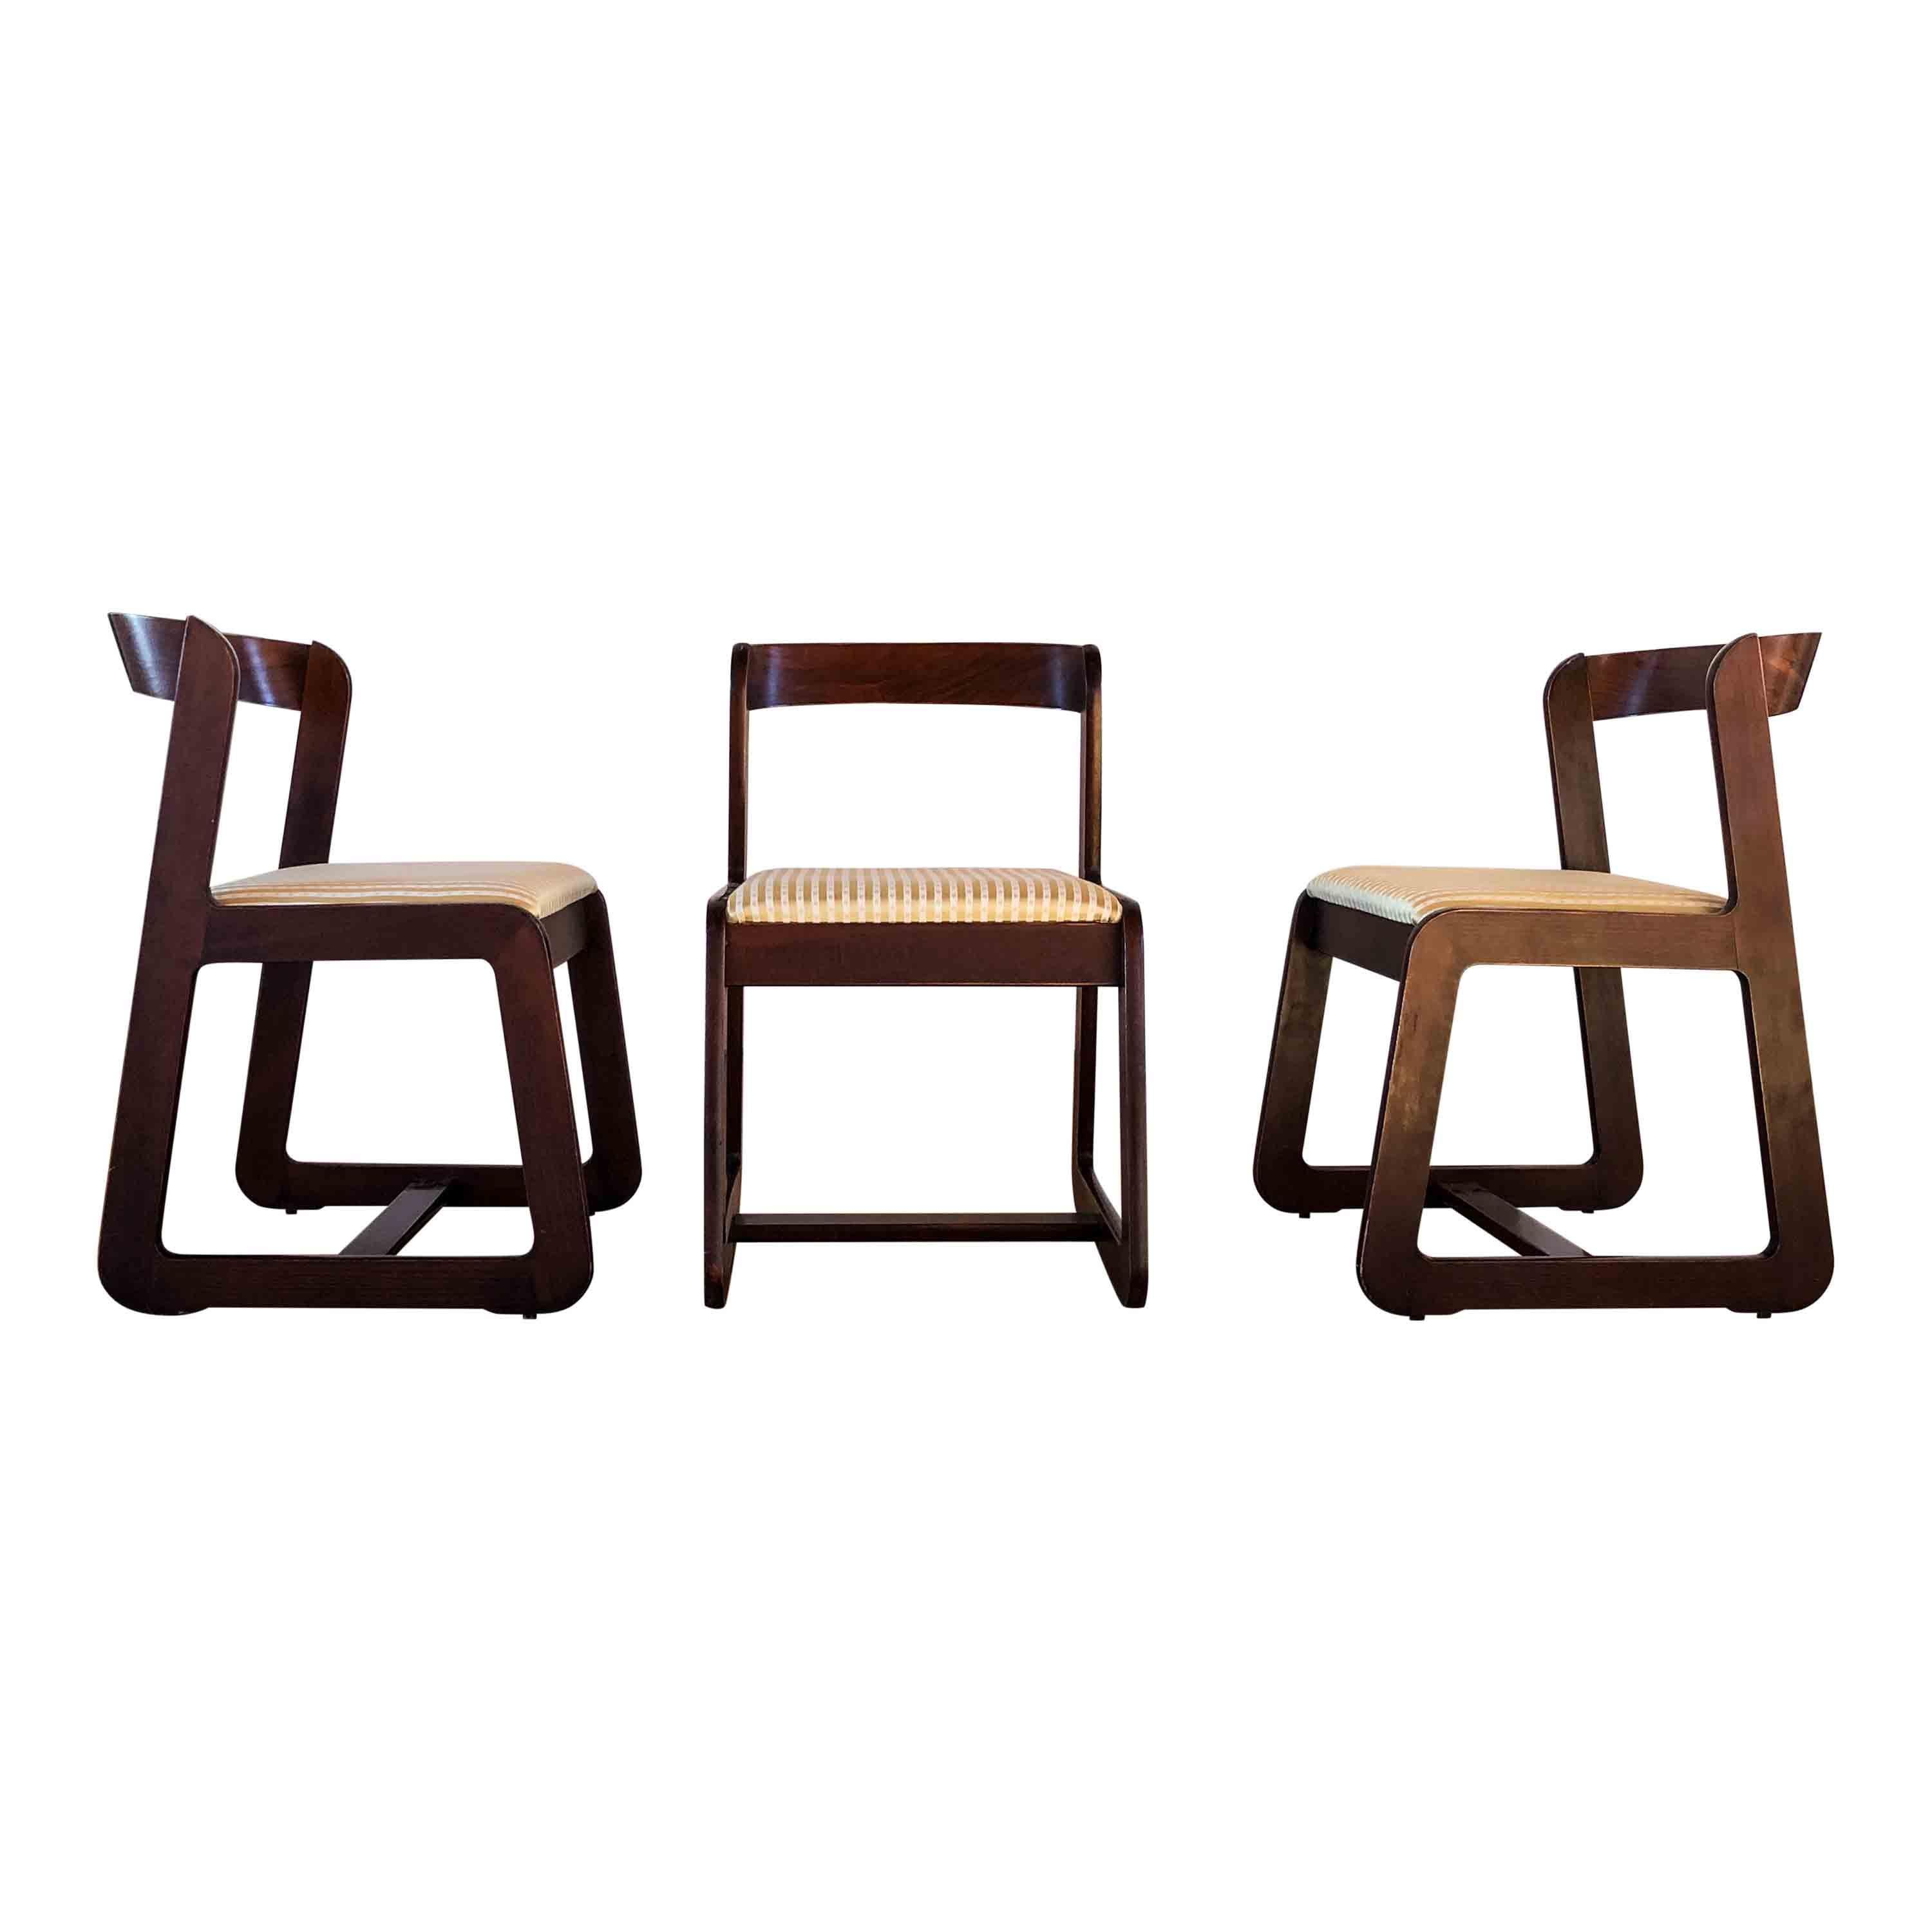 Italian Midcentury Beech Dining Chairs by Willy Rizzo for Mario Sabot, 70s, Set of 6 For Sale